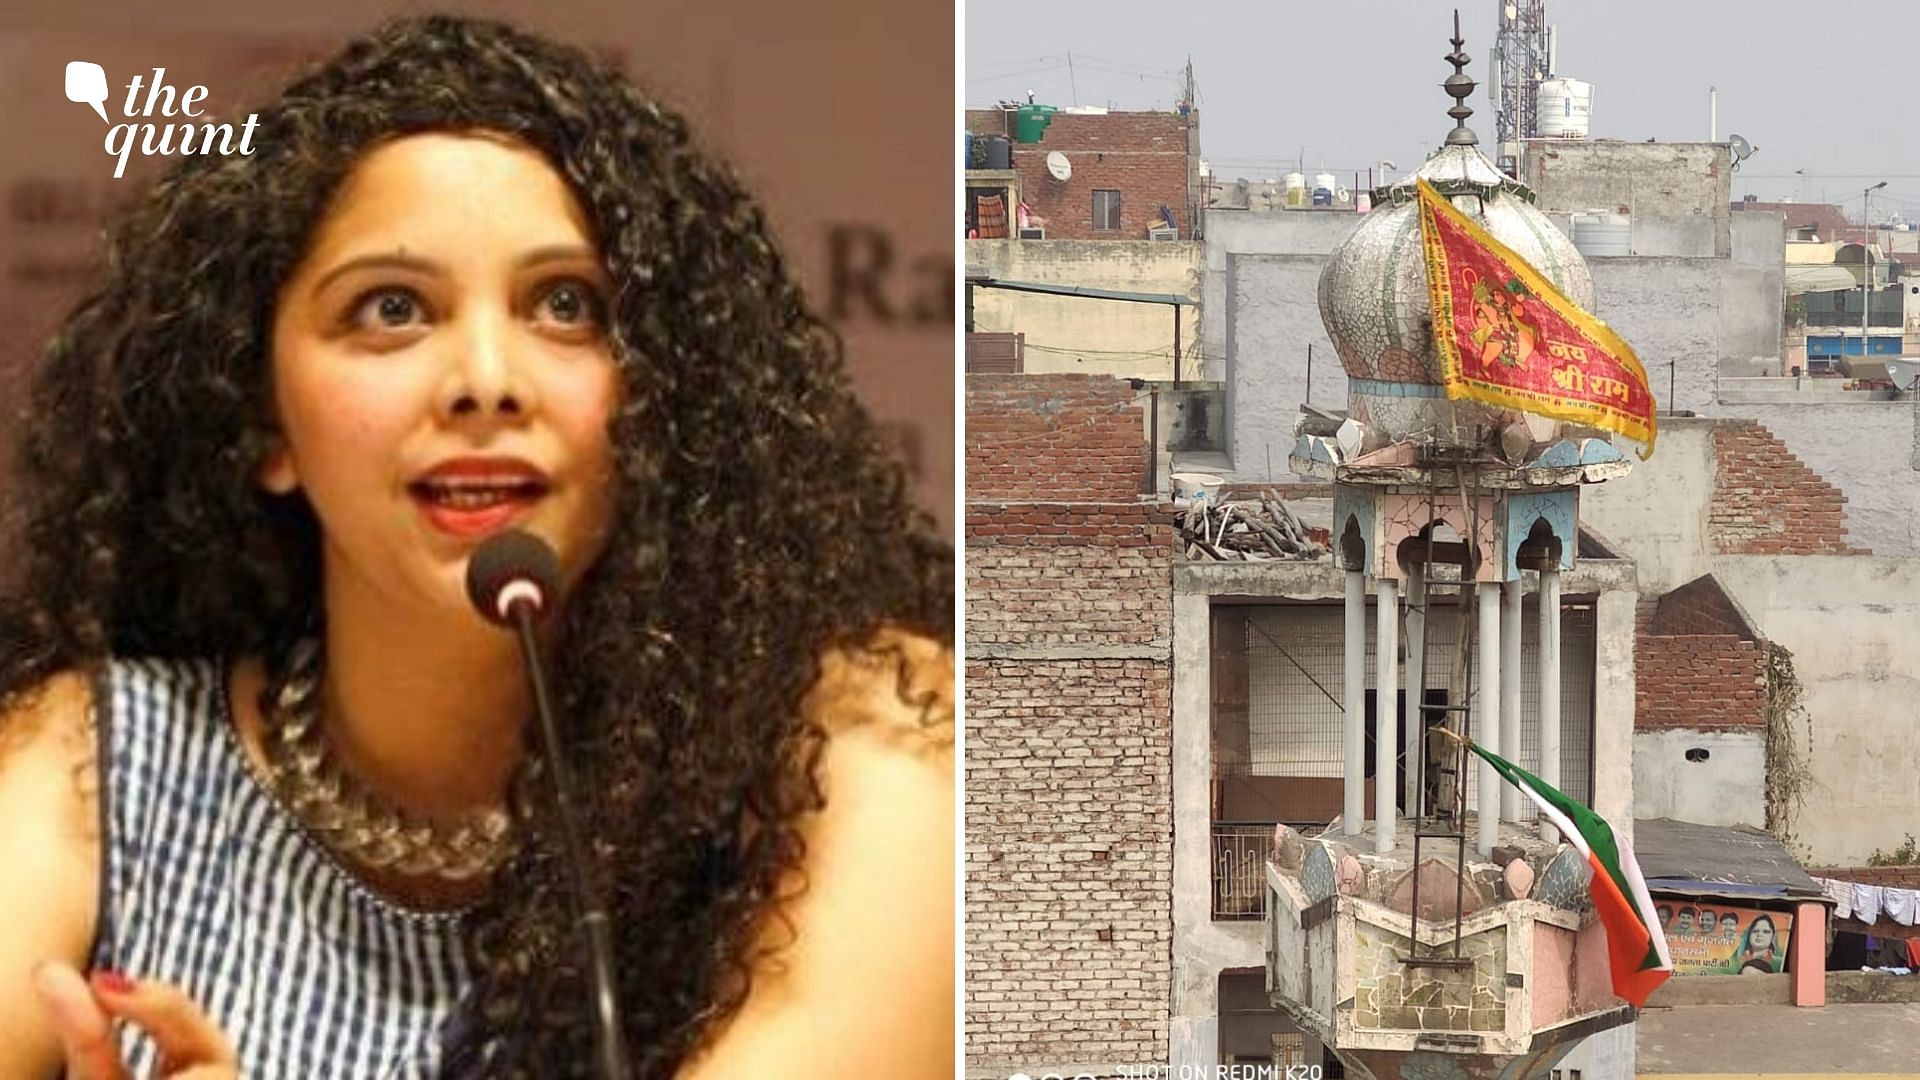 A police complaint application has been filed seeking action against journalist Rana Ayyub for posting an “old” video purportedly of the Delhi violence.